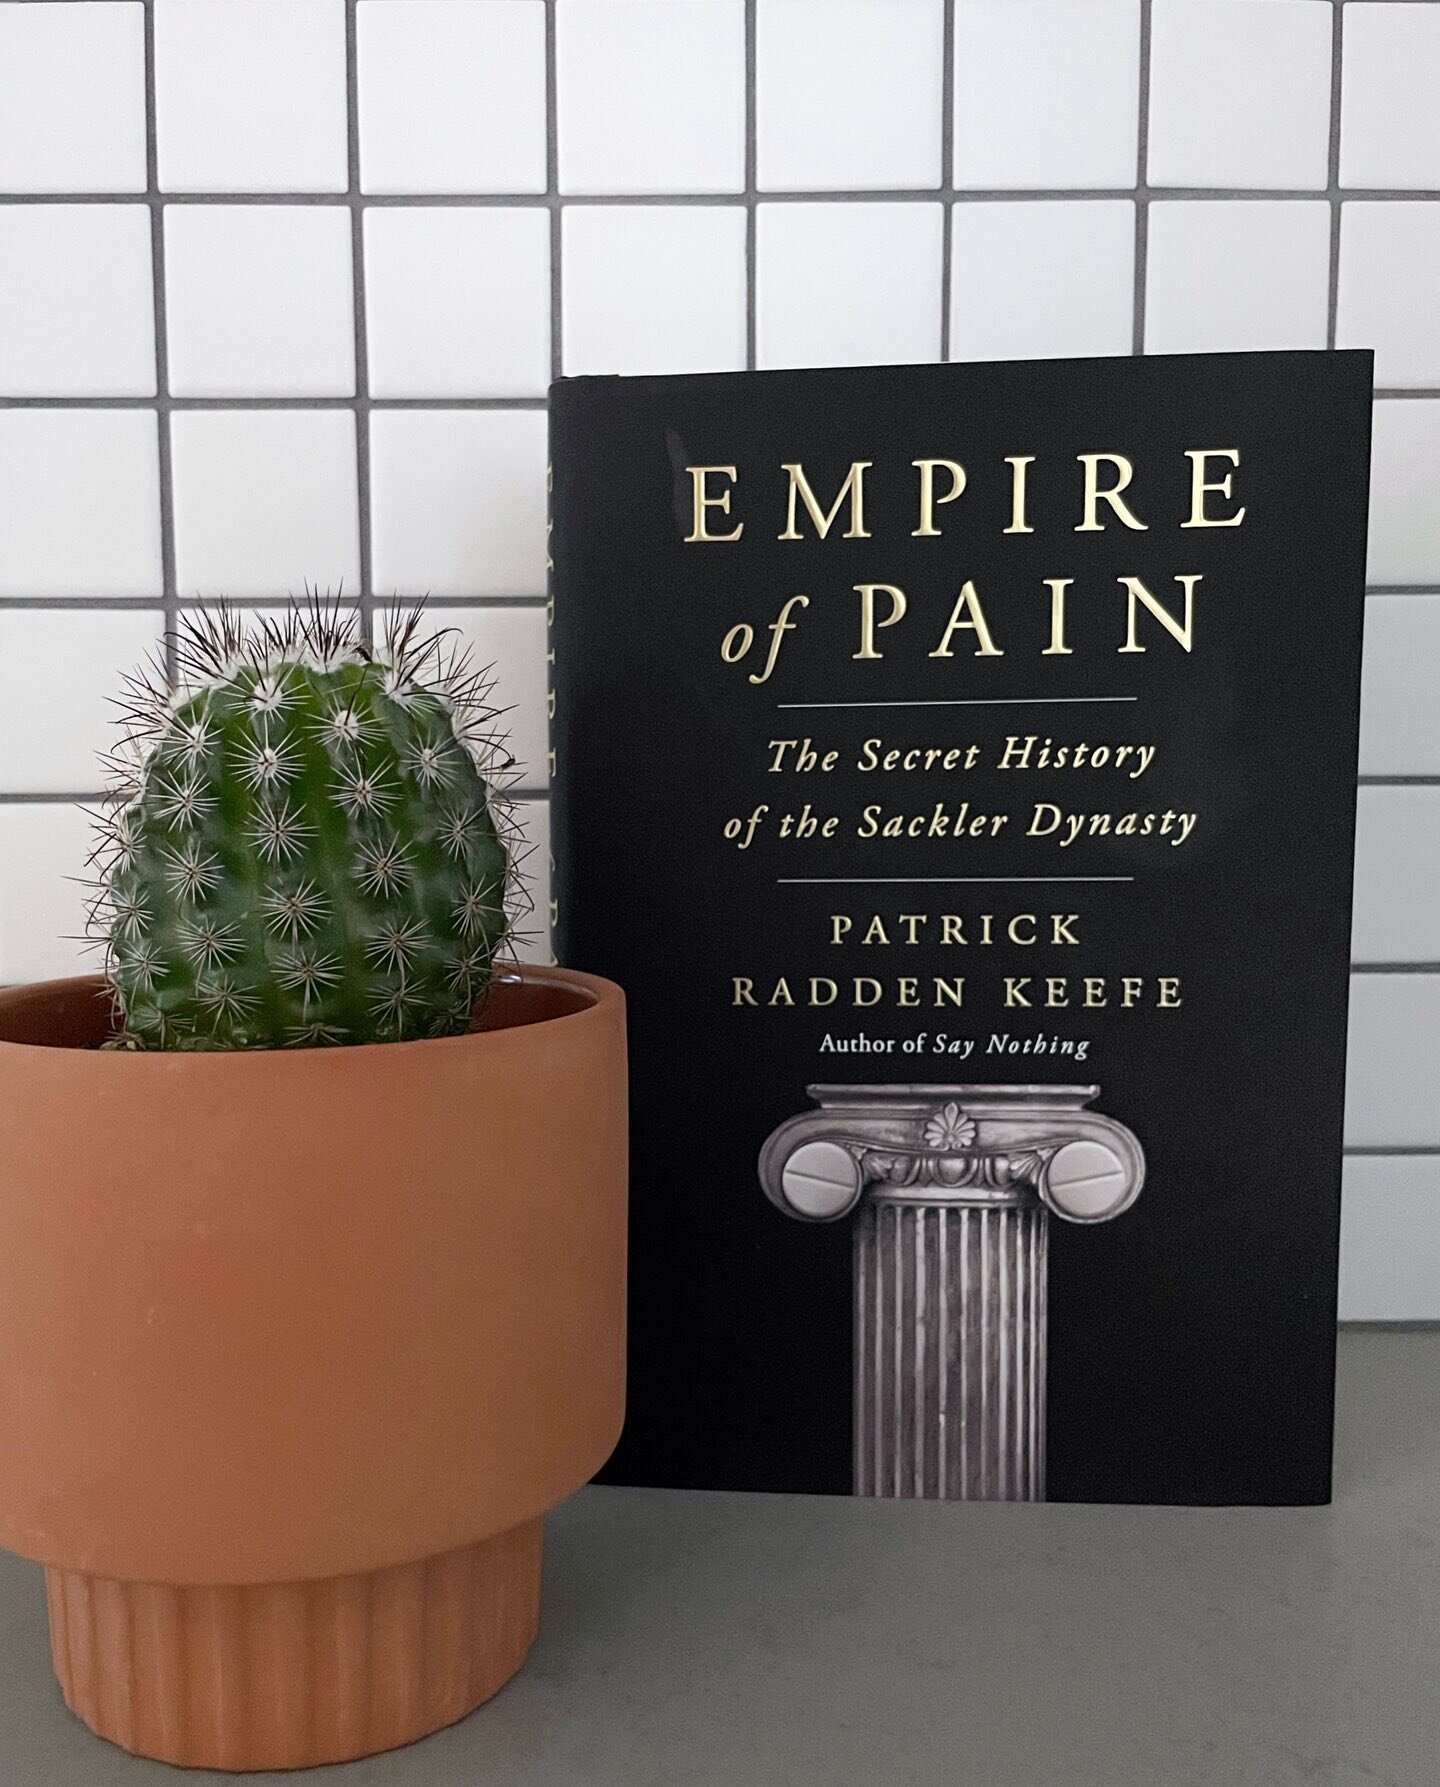 EMPIRE OF PAIN | Patrick Radden Keefe 

The short answer: 4/5 ⭐️

READ IF:
📗You have a cursory understanding of the opioid crisis and are interested in taking a deep dive into how we got here and who is responsible.
📗You love investigative journali